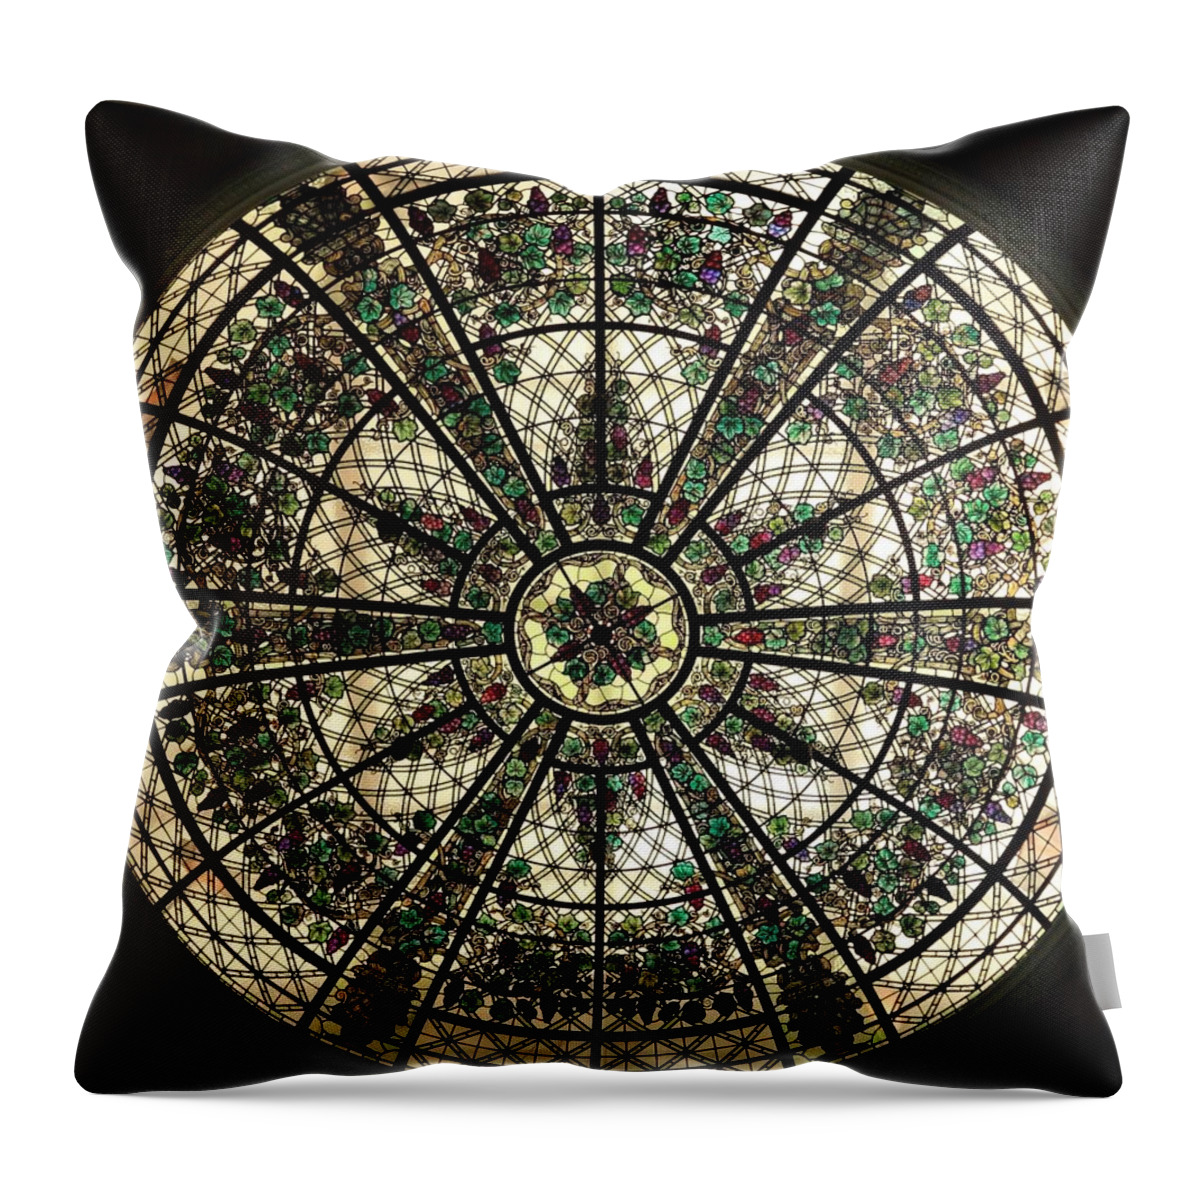 Casa Loma Castle Throw Pillow featuring the photograph Ceiling Dome in Casa Loma by Mingming Jiang